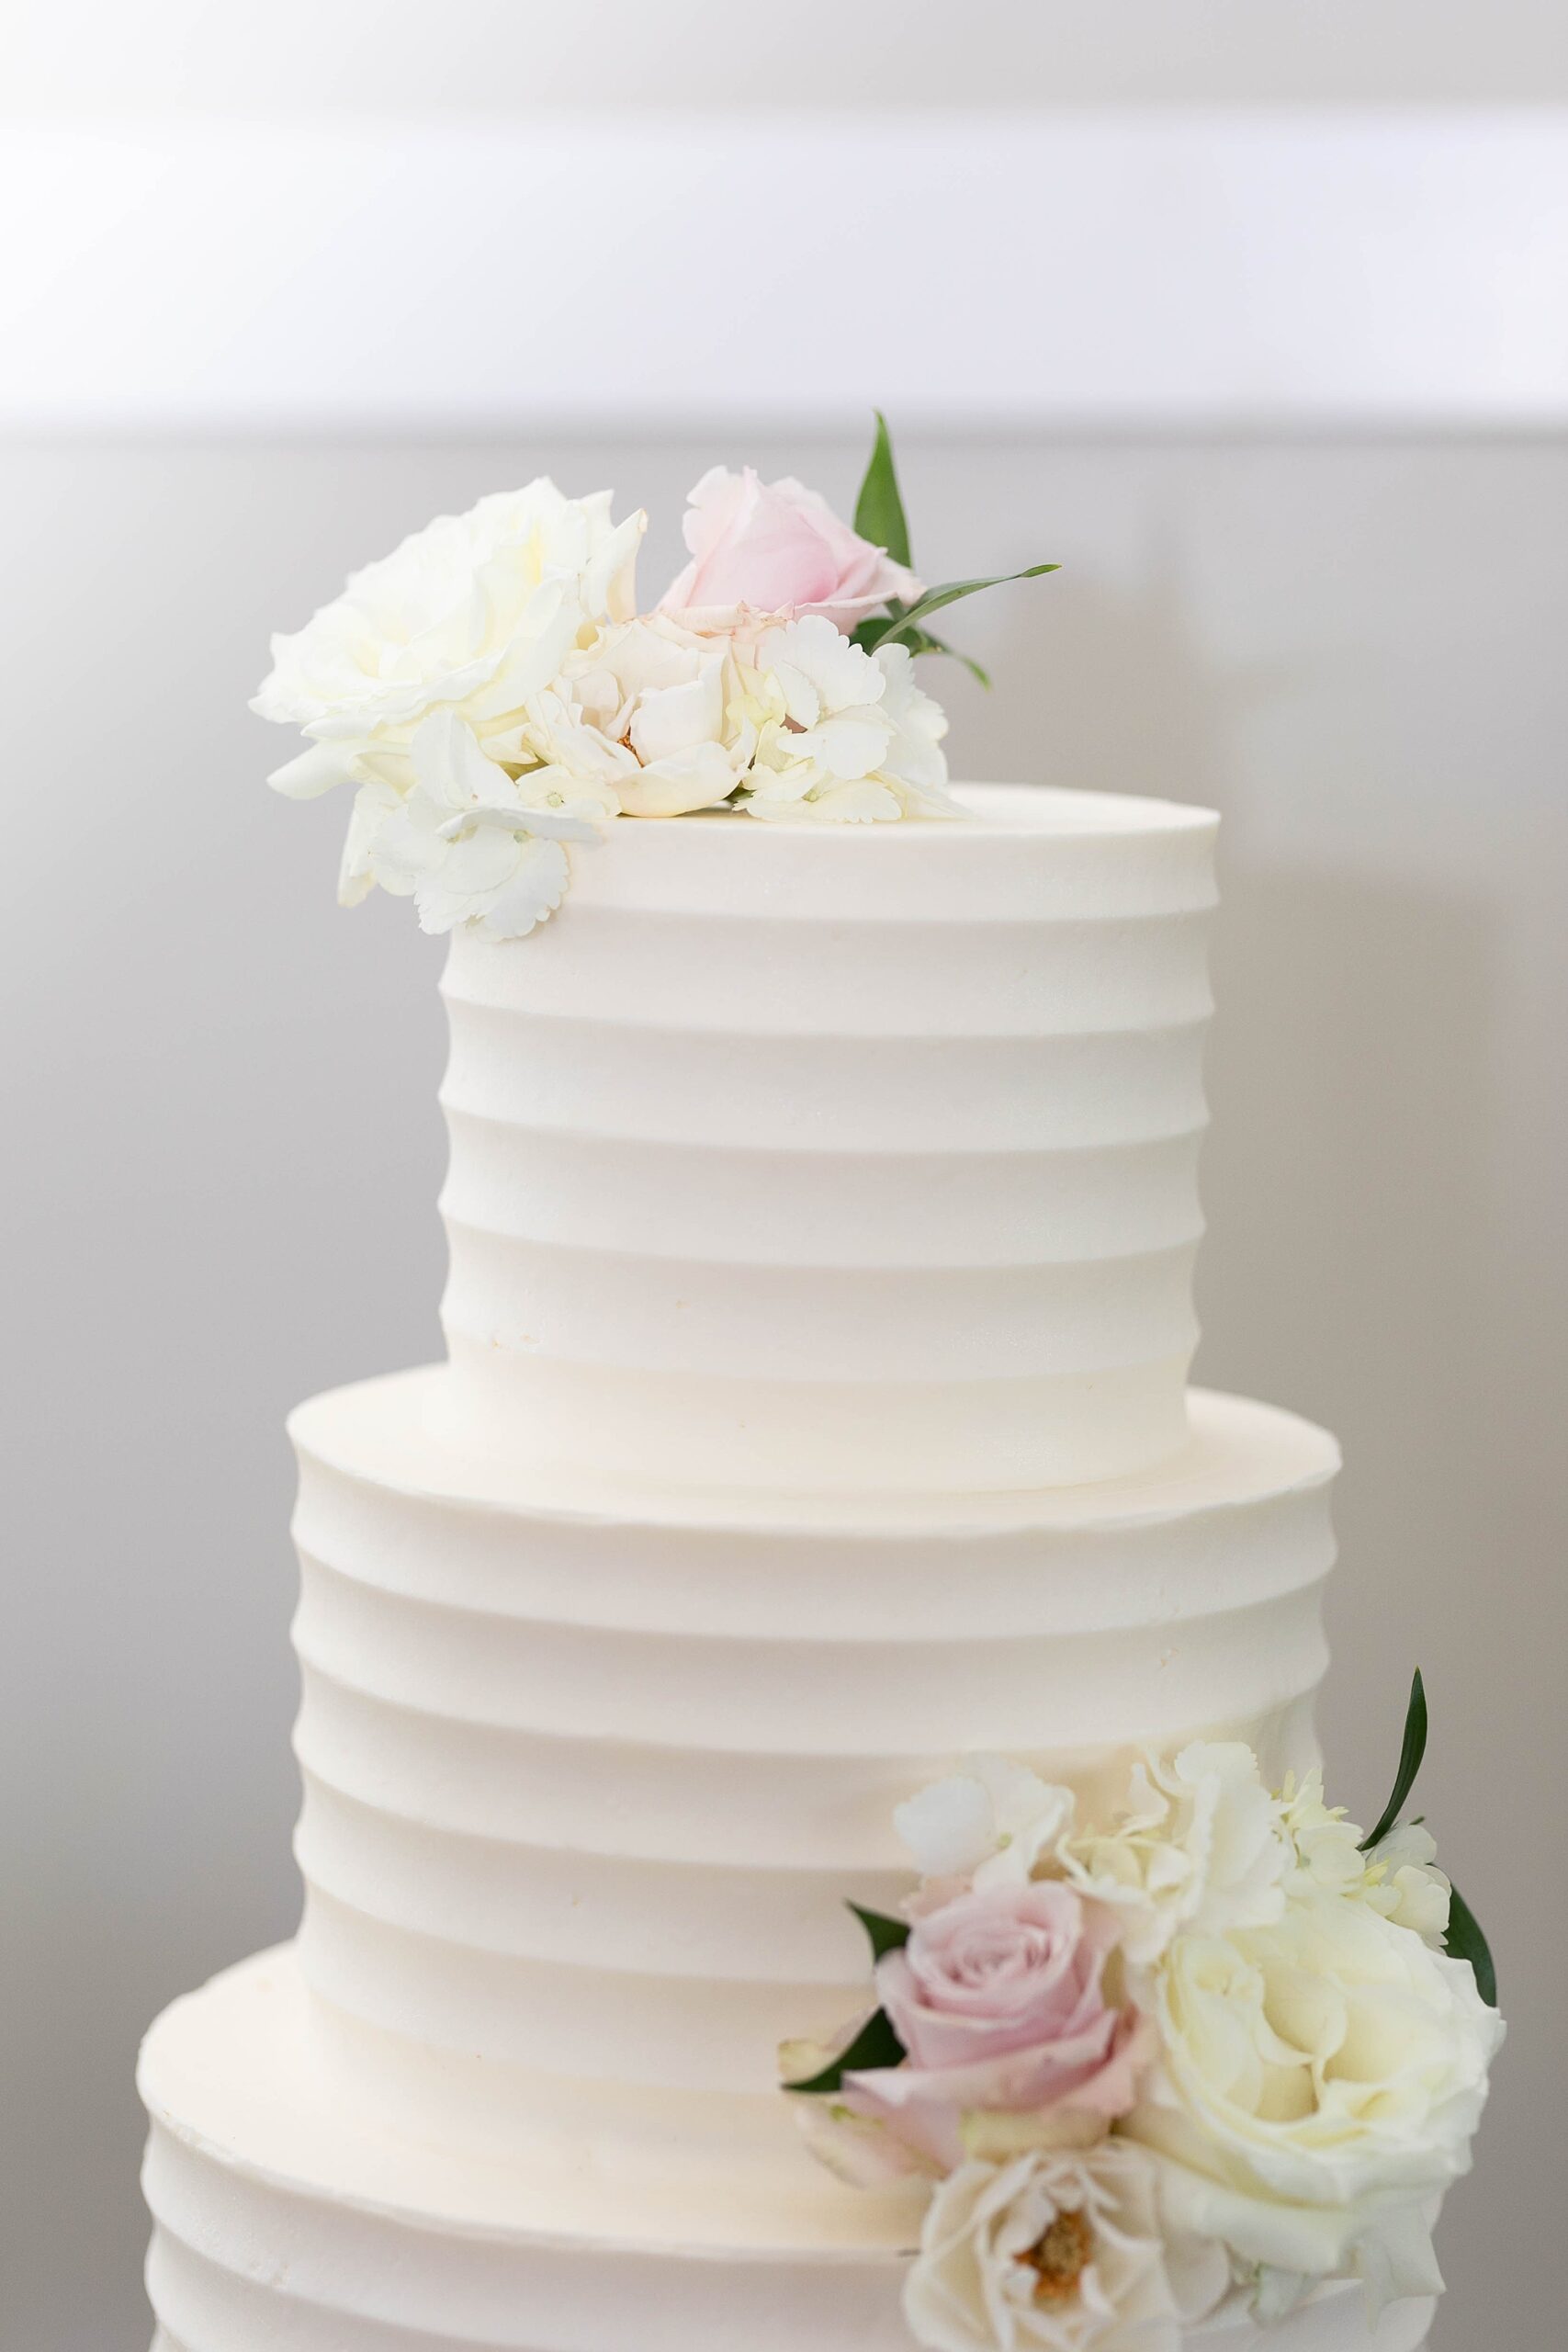 tiered wedding cake with white icing and florals on layers 